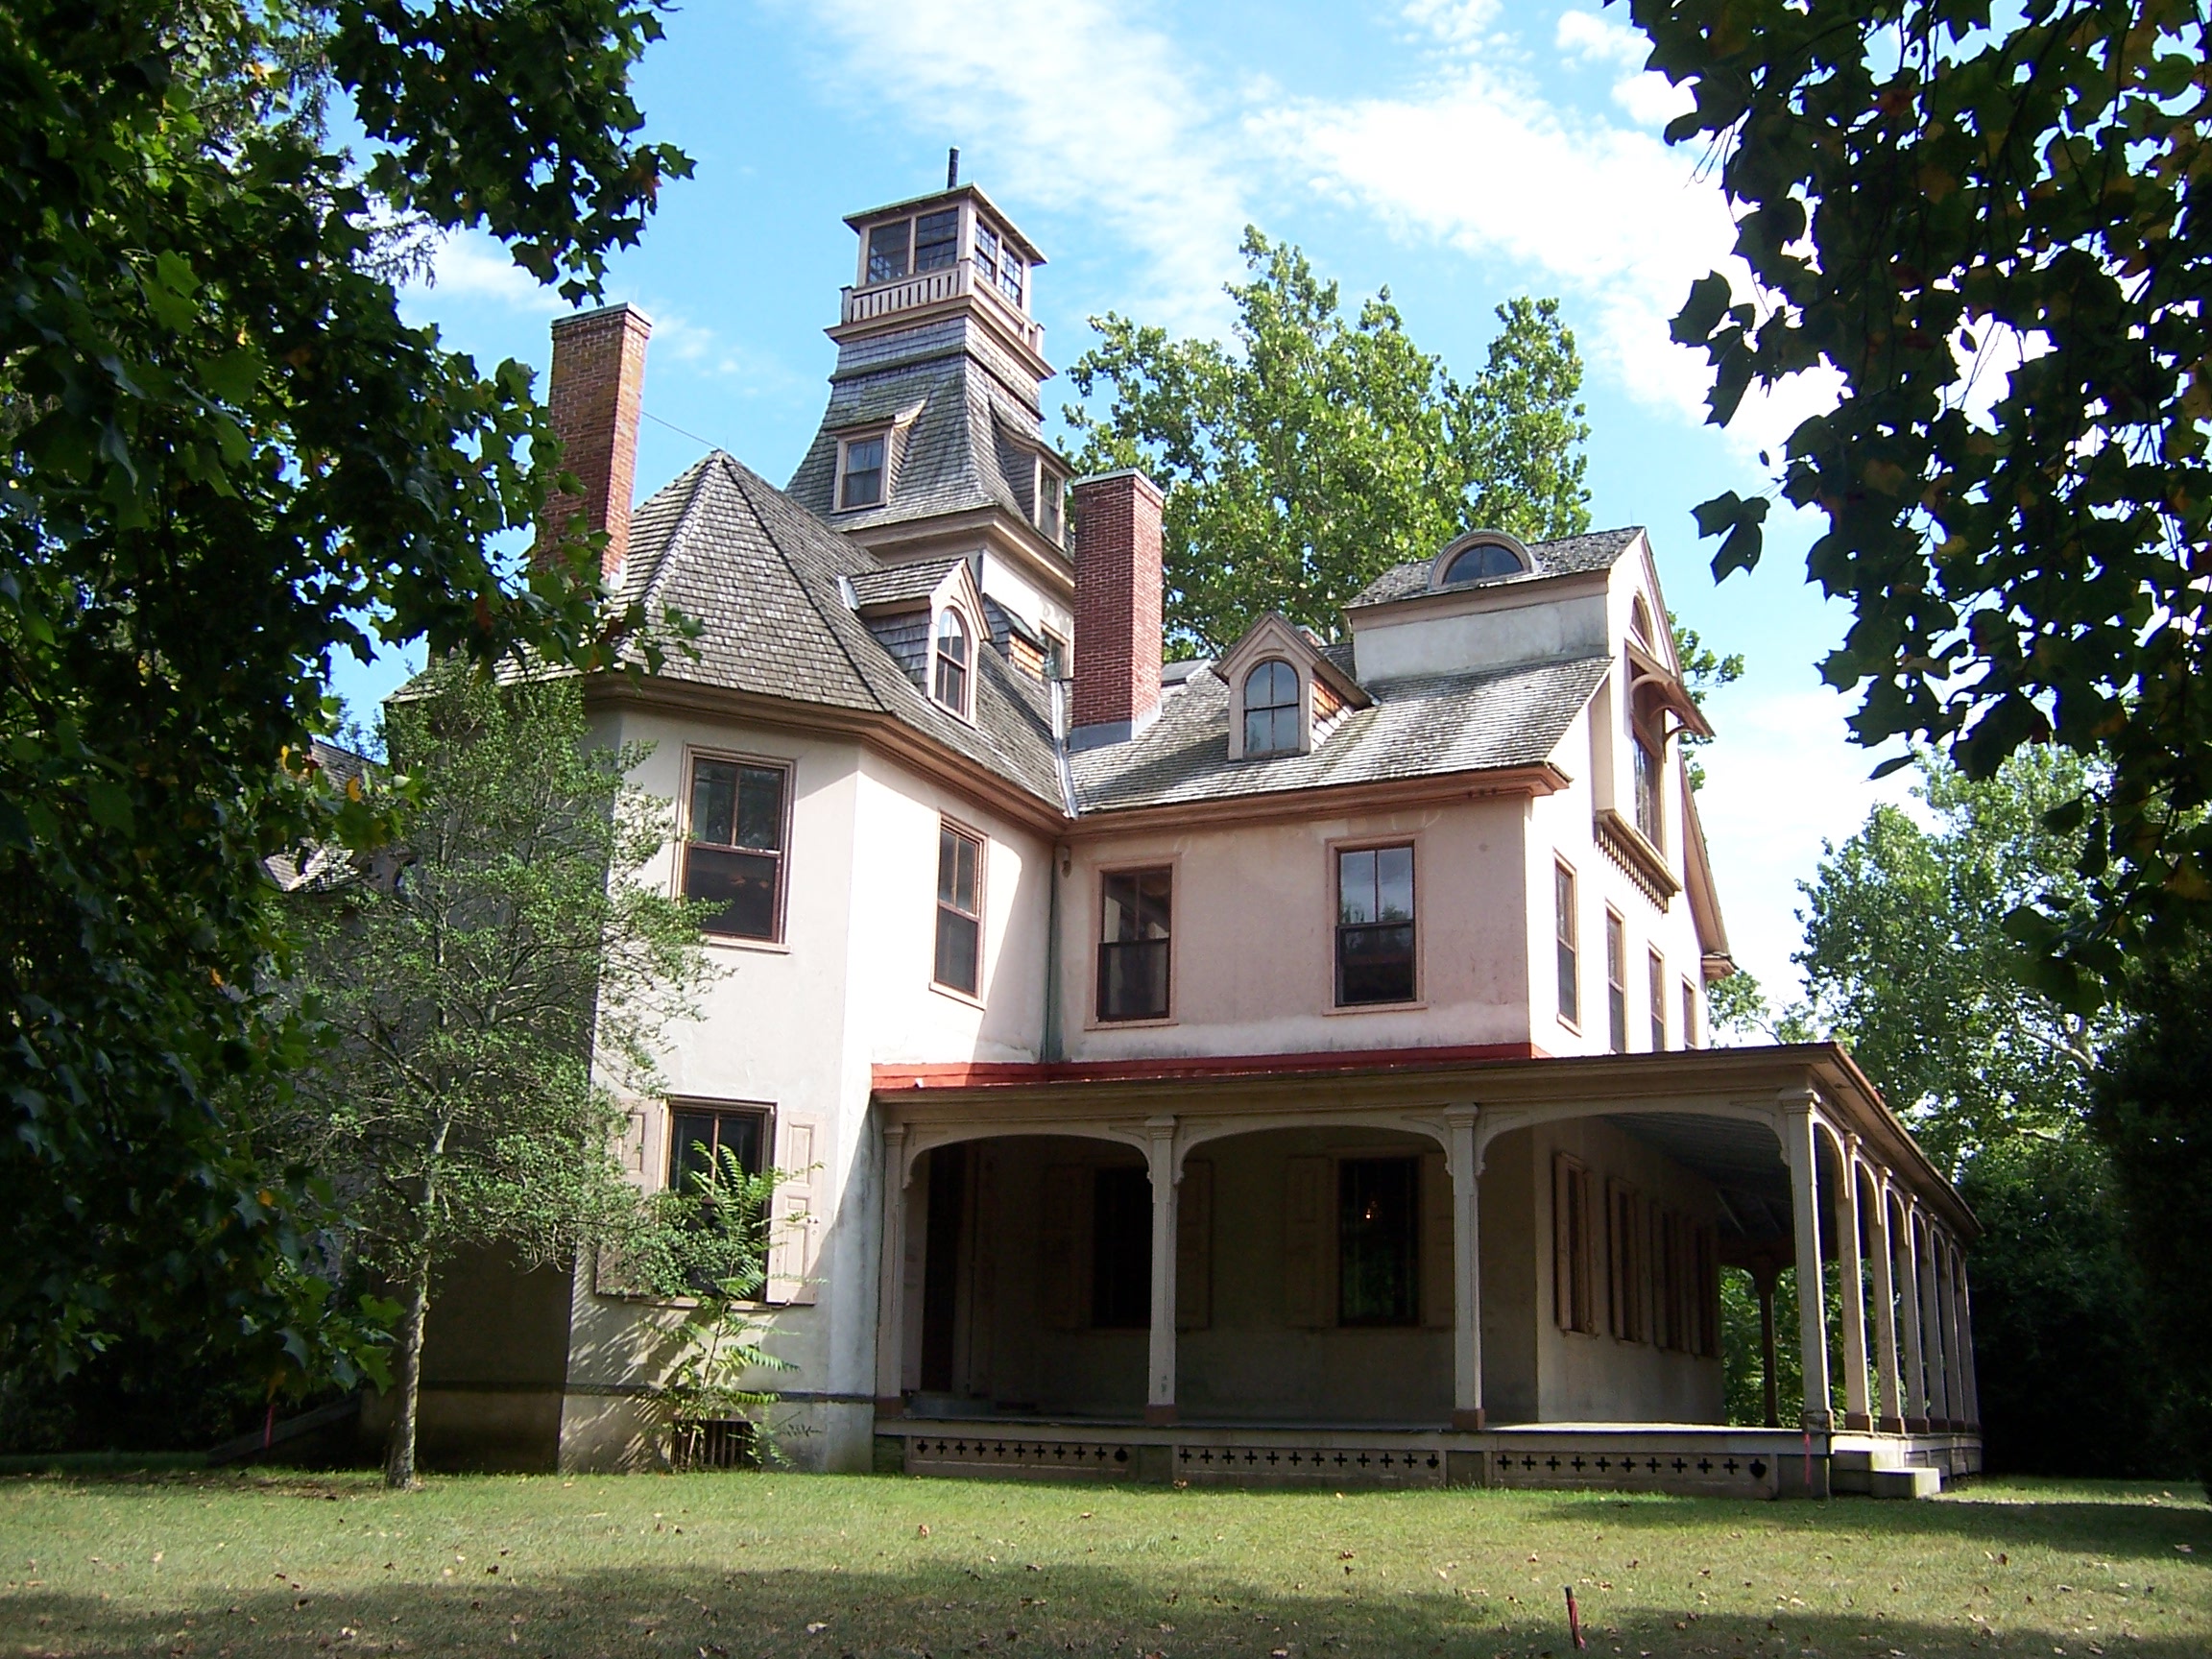 The mansion at Batsto State Park